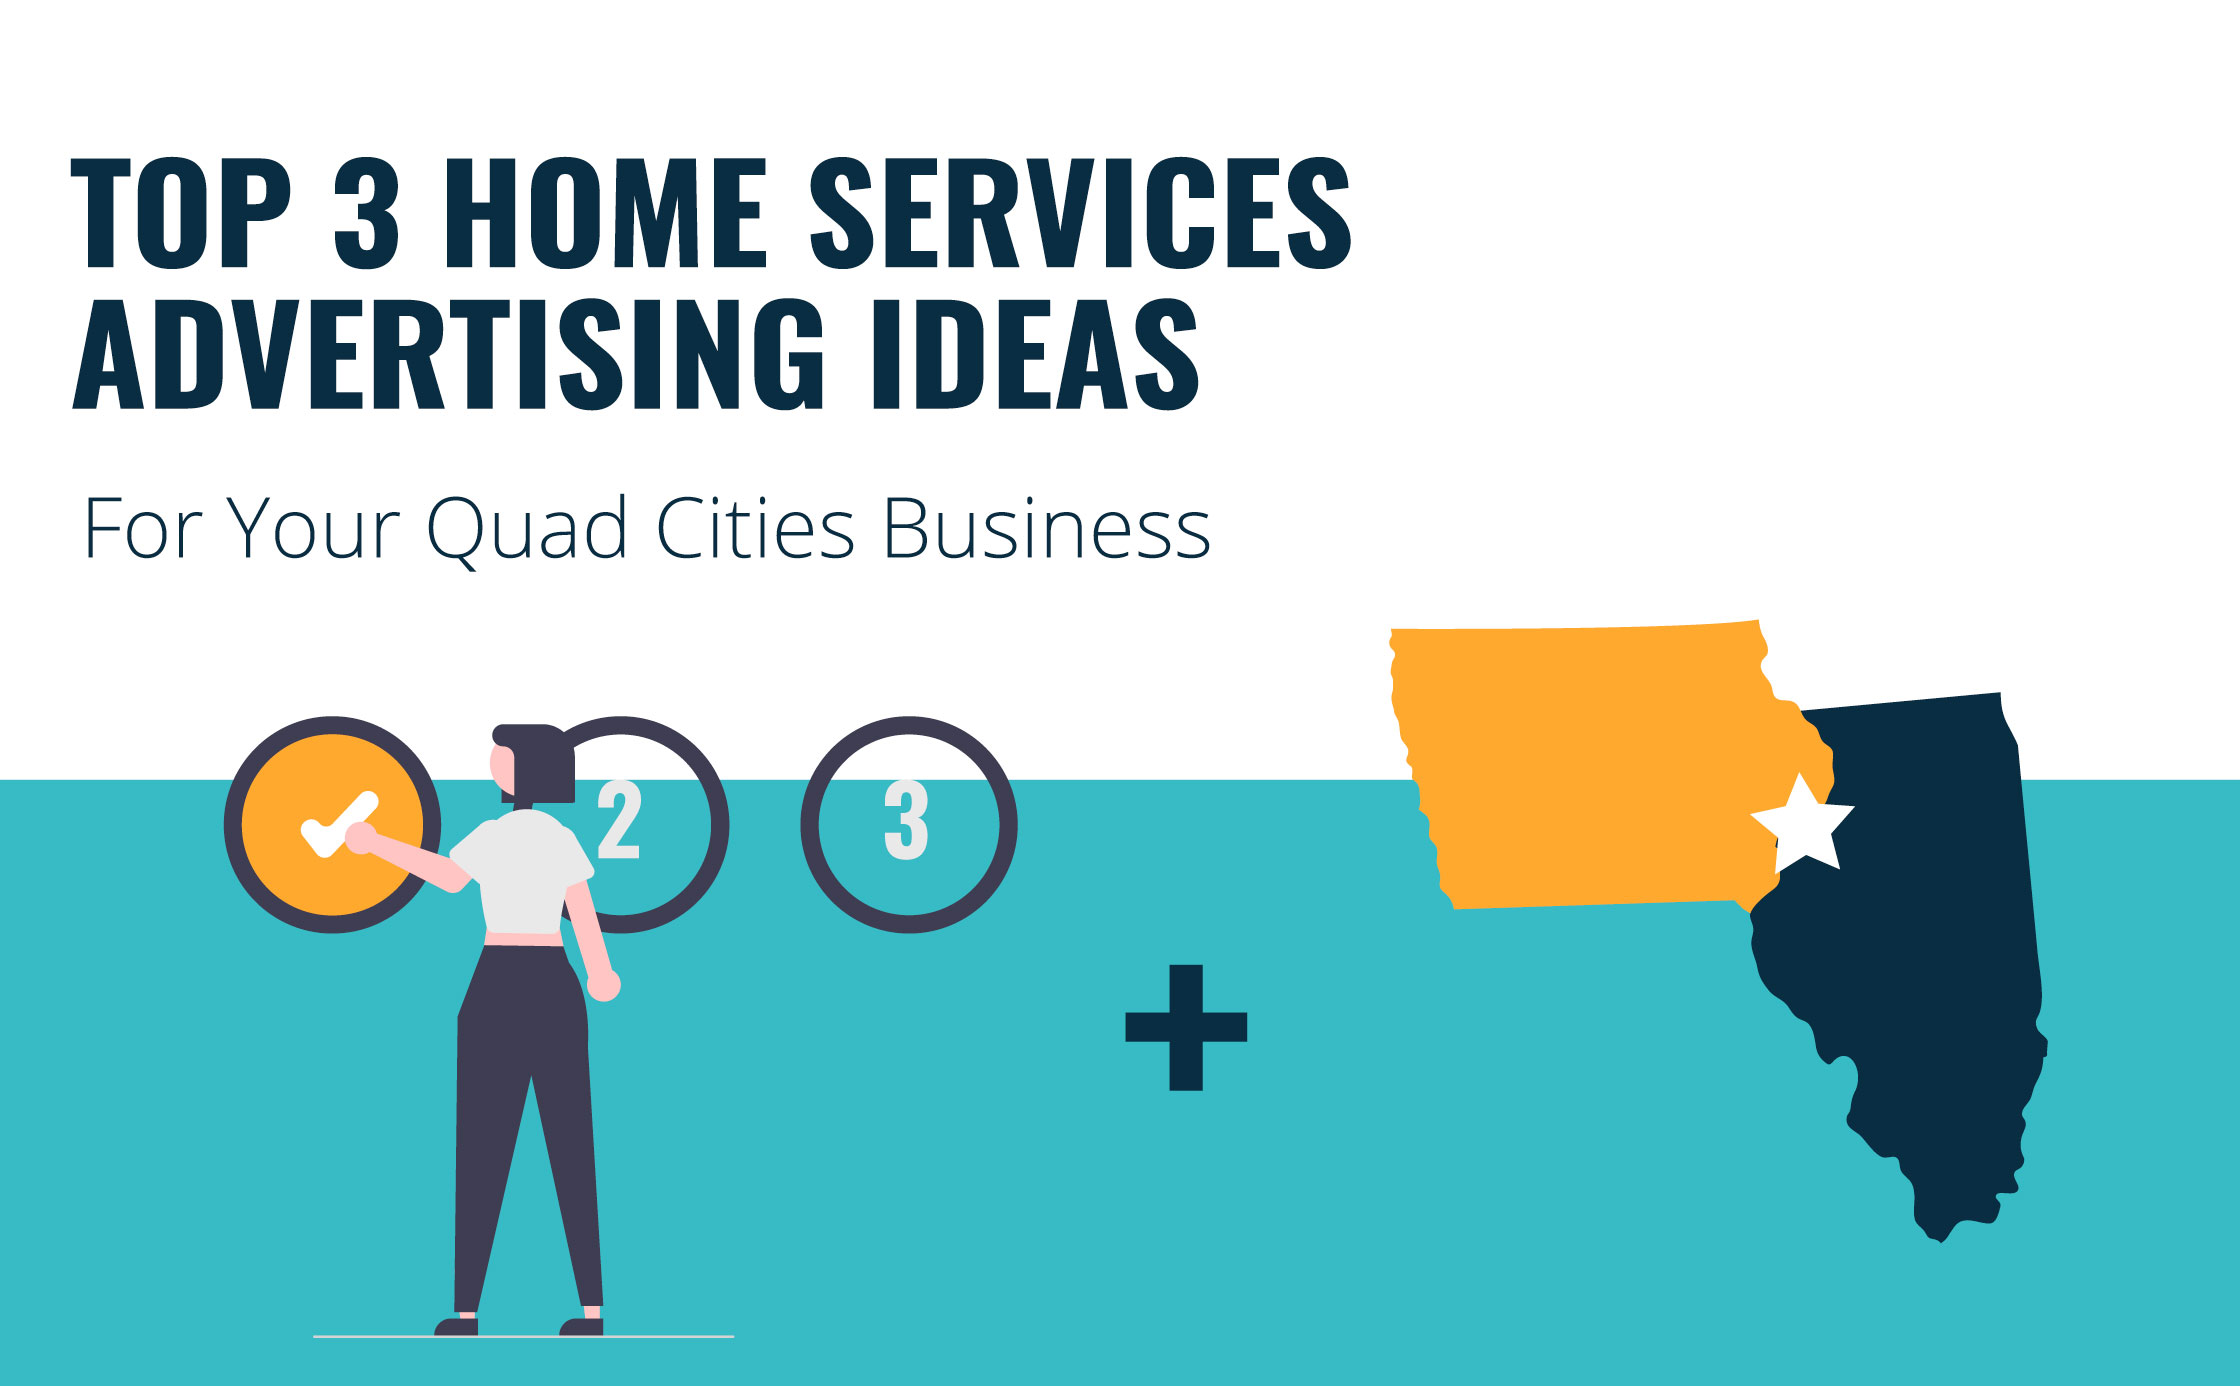 Top 3 Home Services Advertising Ideas For Your Quad Cities Business